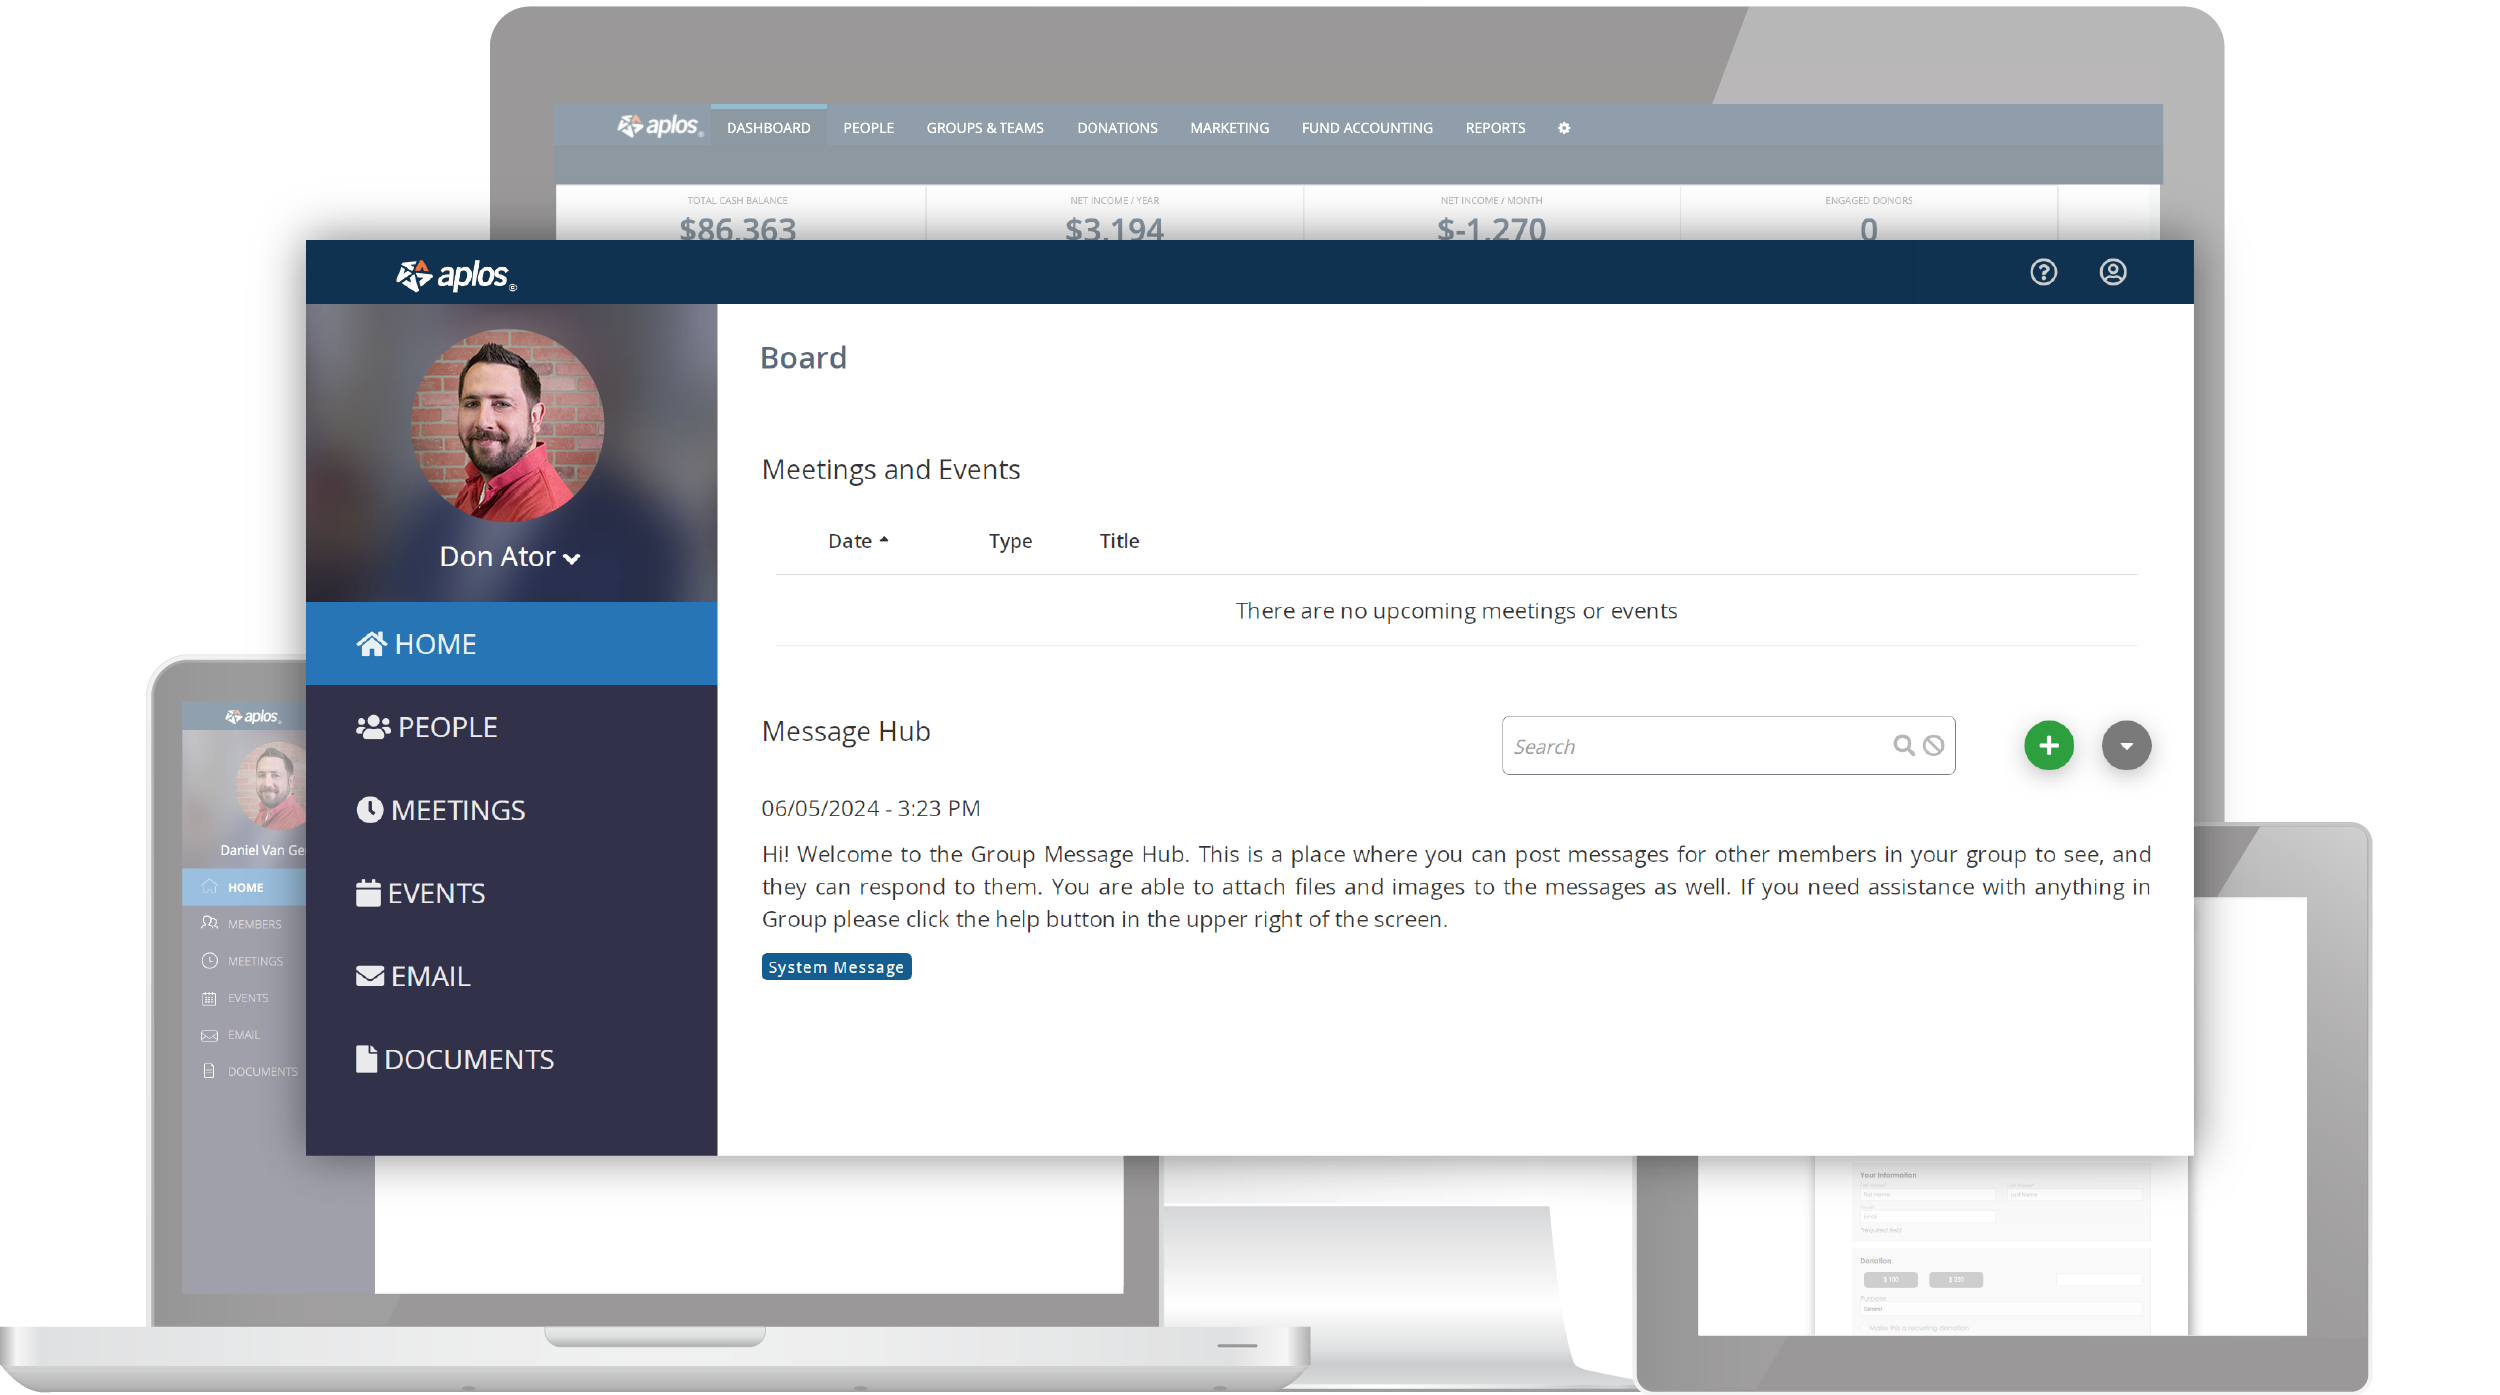 Manage supporters and volunteers, engage your people with communication tools, share files with your board, and more.